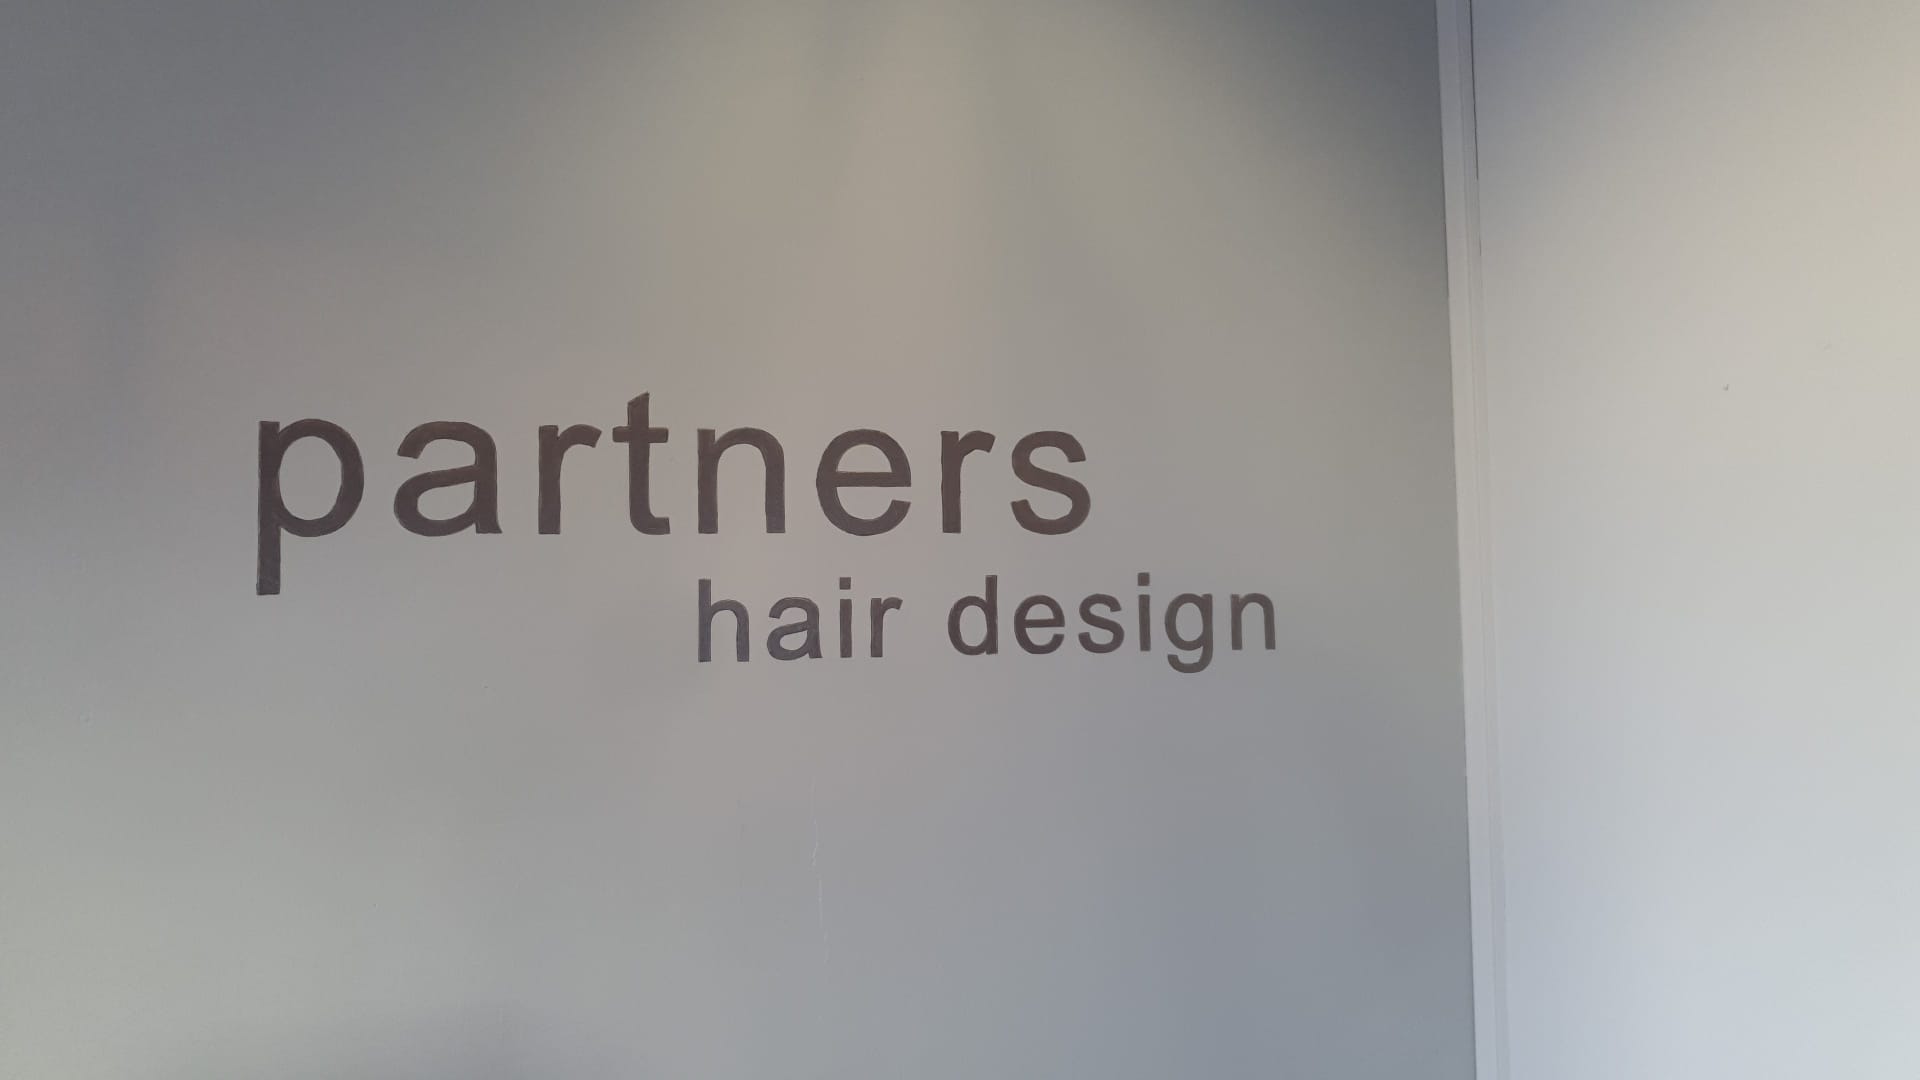 You can book your haircut with Partners Hair Design